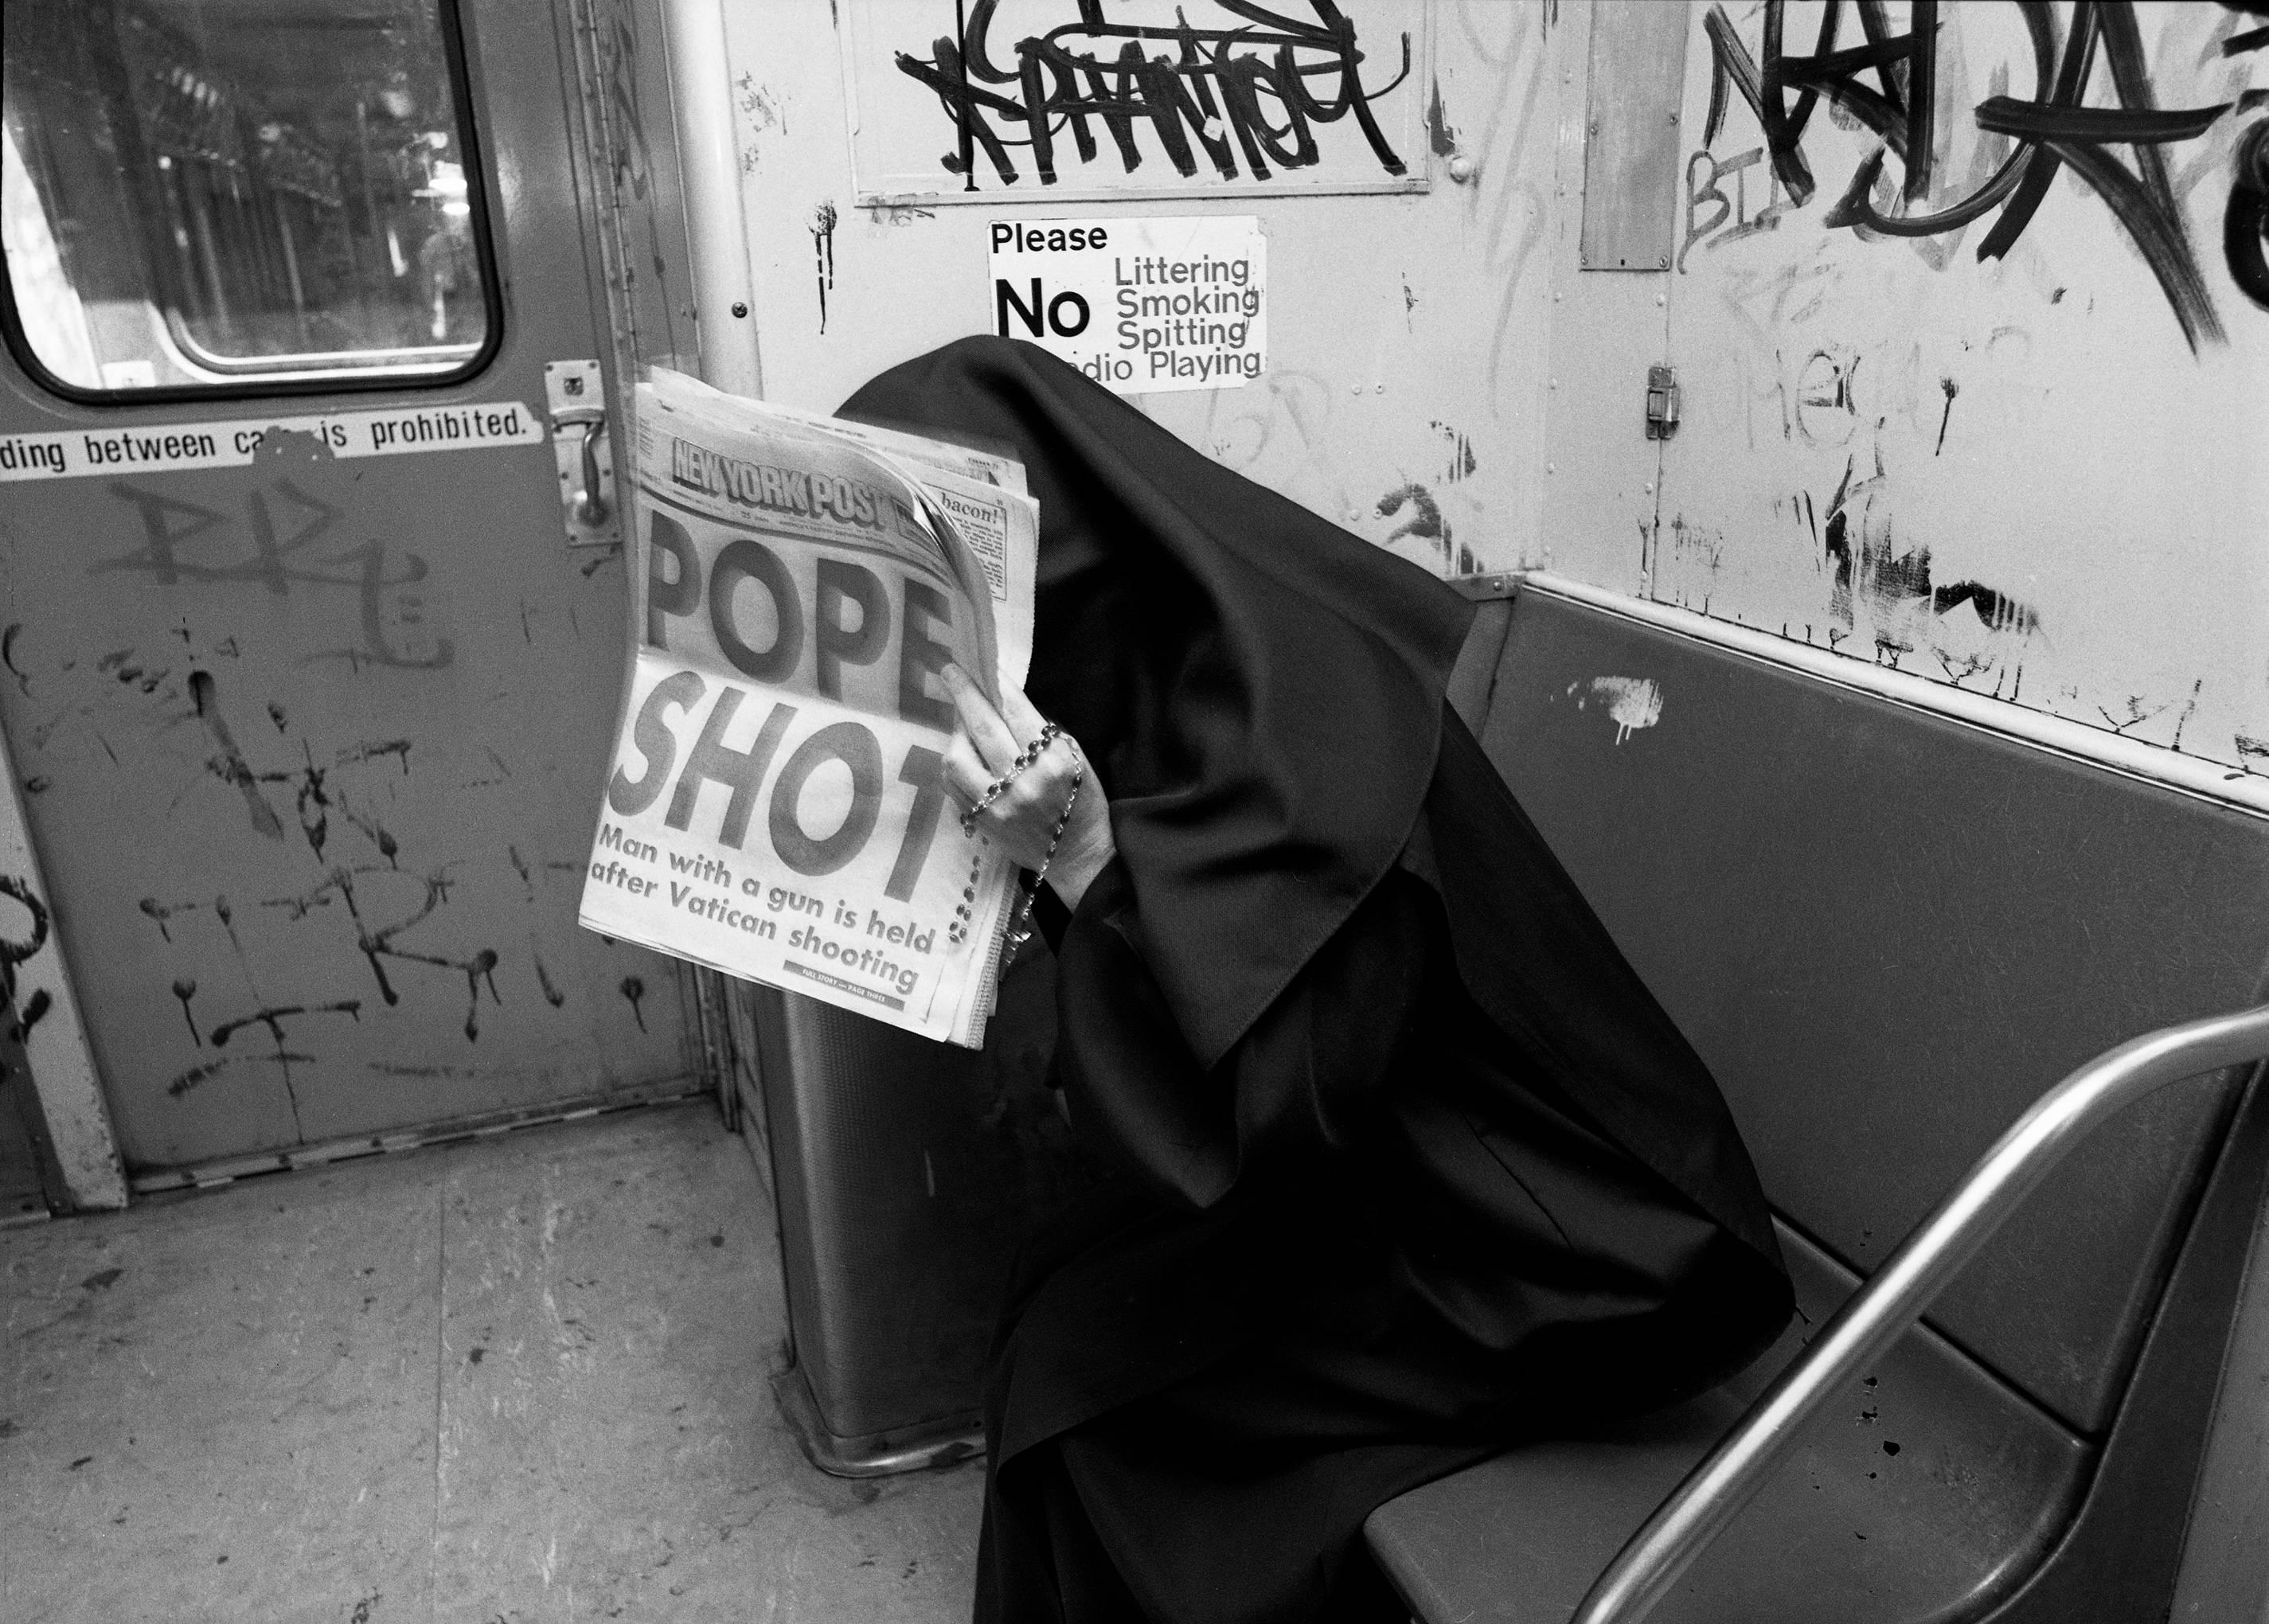 Nun, Subway, Black and White Limited Edition Photograph, NYC, 1970s, 1980s